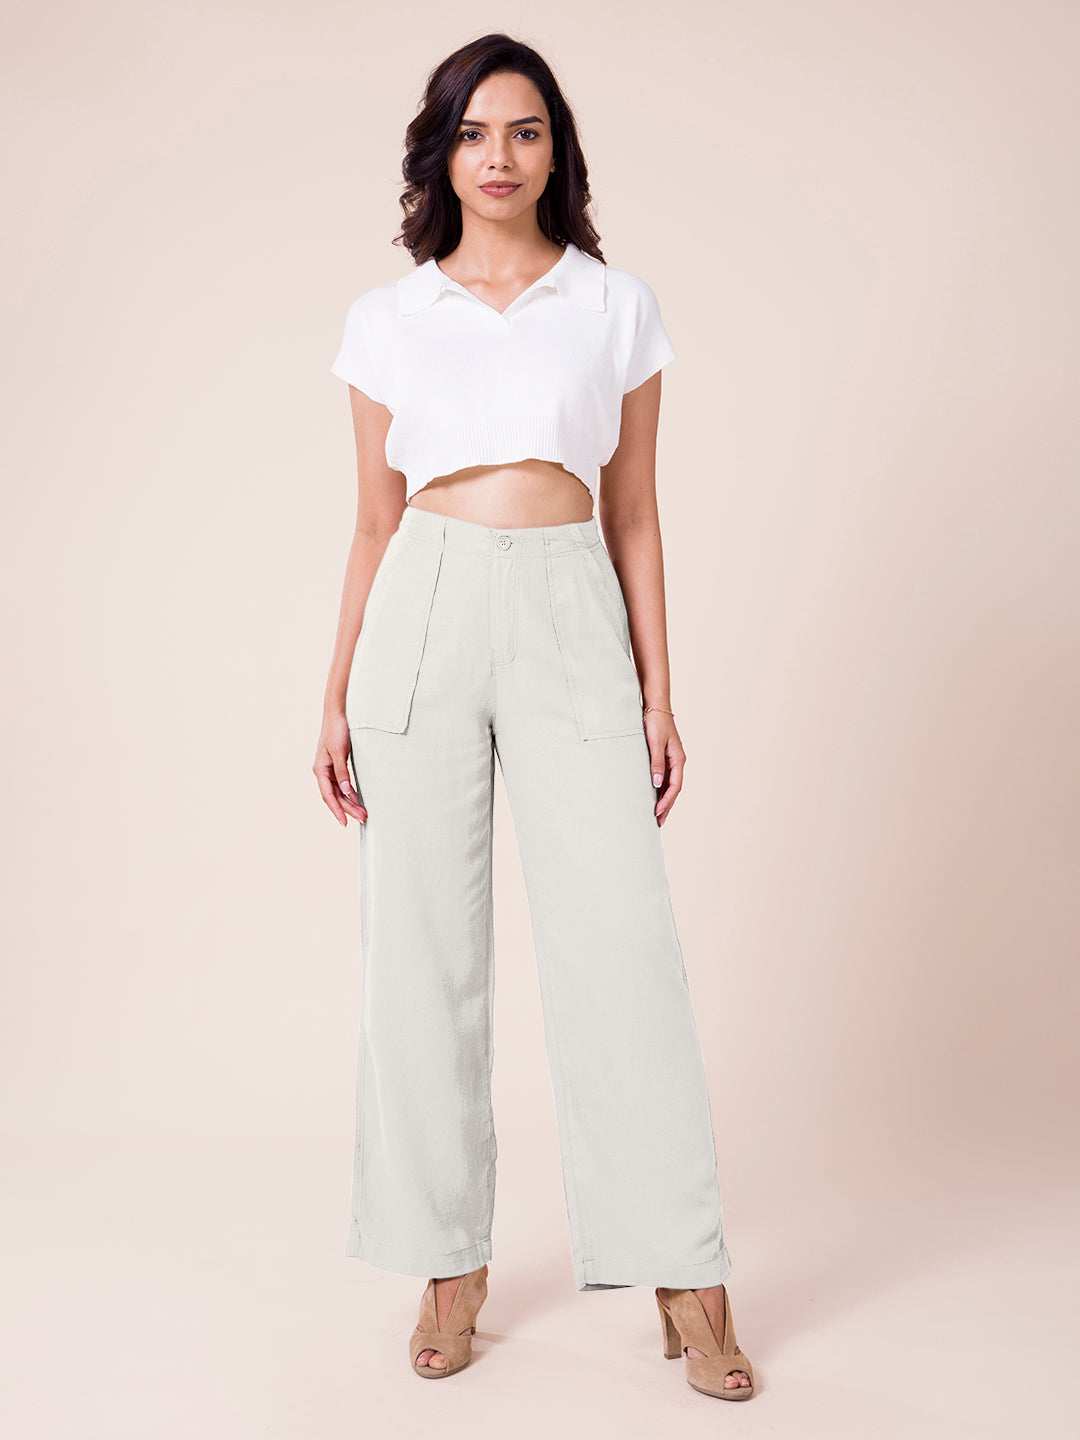 Wide Leg Pants for Women Solid Thin High Waist Pocket Suit Cargo